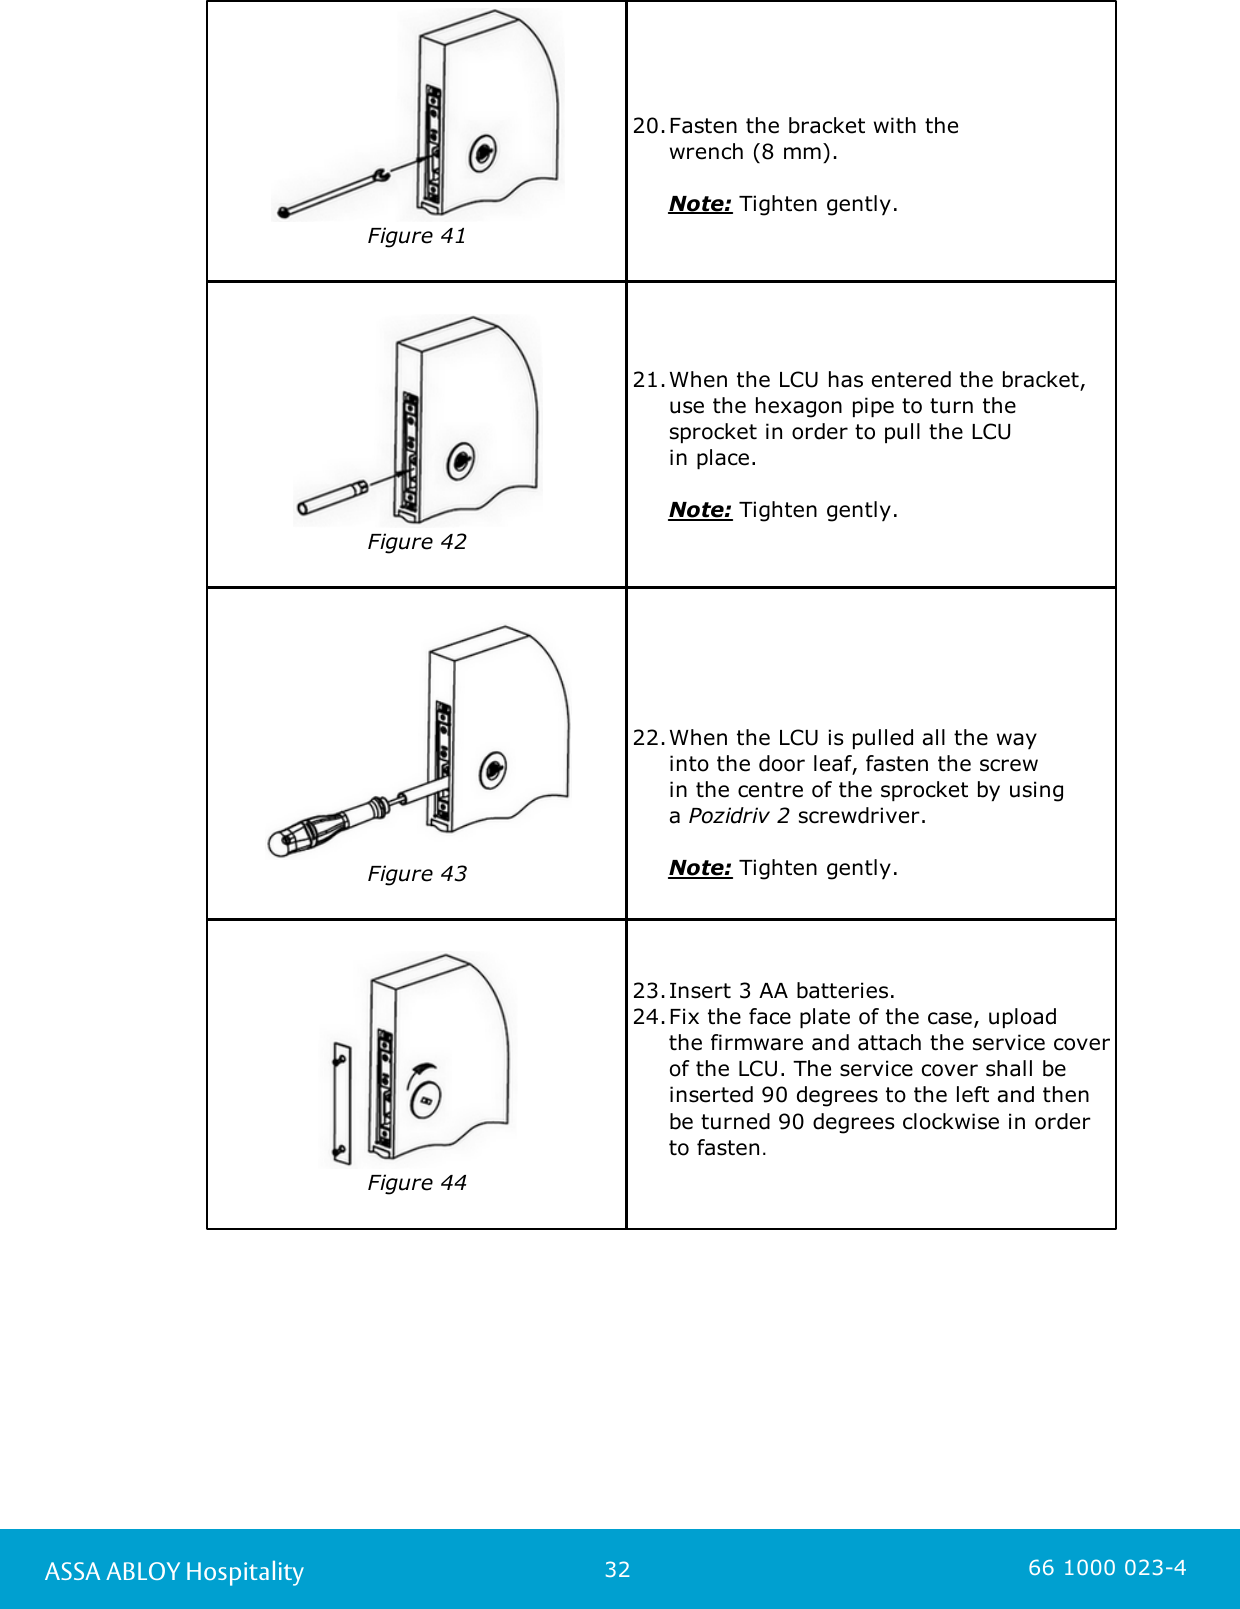 32ASSA ABLOY Hospitality 66 1000 023-4Figure 4120.Fasten the bracket with the      wrench (8 mm).      Note: Tighten gently.Figure 4221.When the LCU has entered the bracket,use the hexagon pipe to turn thesprocket in order to pull the LCU in place.      Note: Tighten gently.Figure 4322.When the LCU is pulled all the way into the door leaf, fasten the screw in the centre of the sprocket by using a Pozidriv 2 screwdriver.      Note: Tighten gently.Figure 4423.Insert 3 AA batteries. 24.Fix the face plate of the case, upload the firmware and attach the service coverof the LCU. The service cover shall beinserted 90 degrees to the left and thenbe turned 90 degrees clockwise in orderto fasten. 